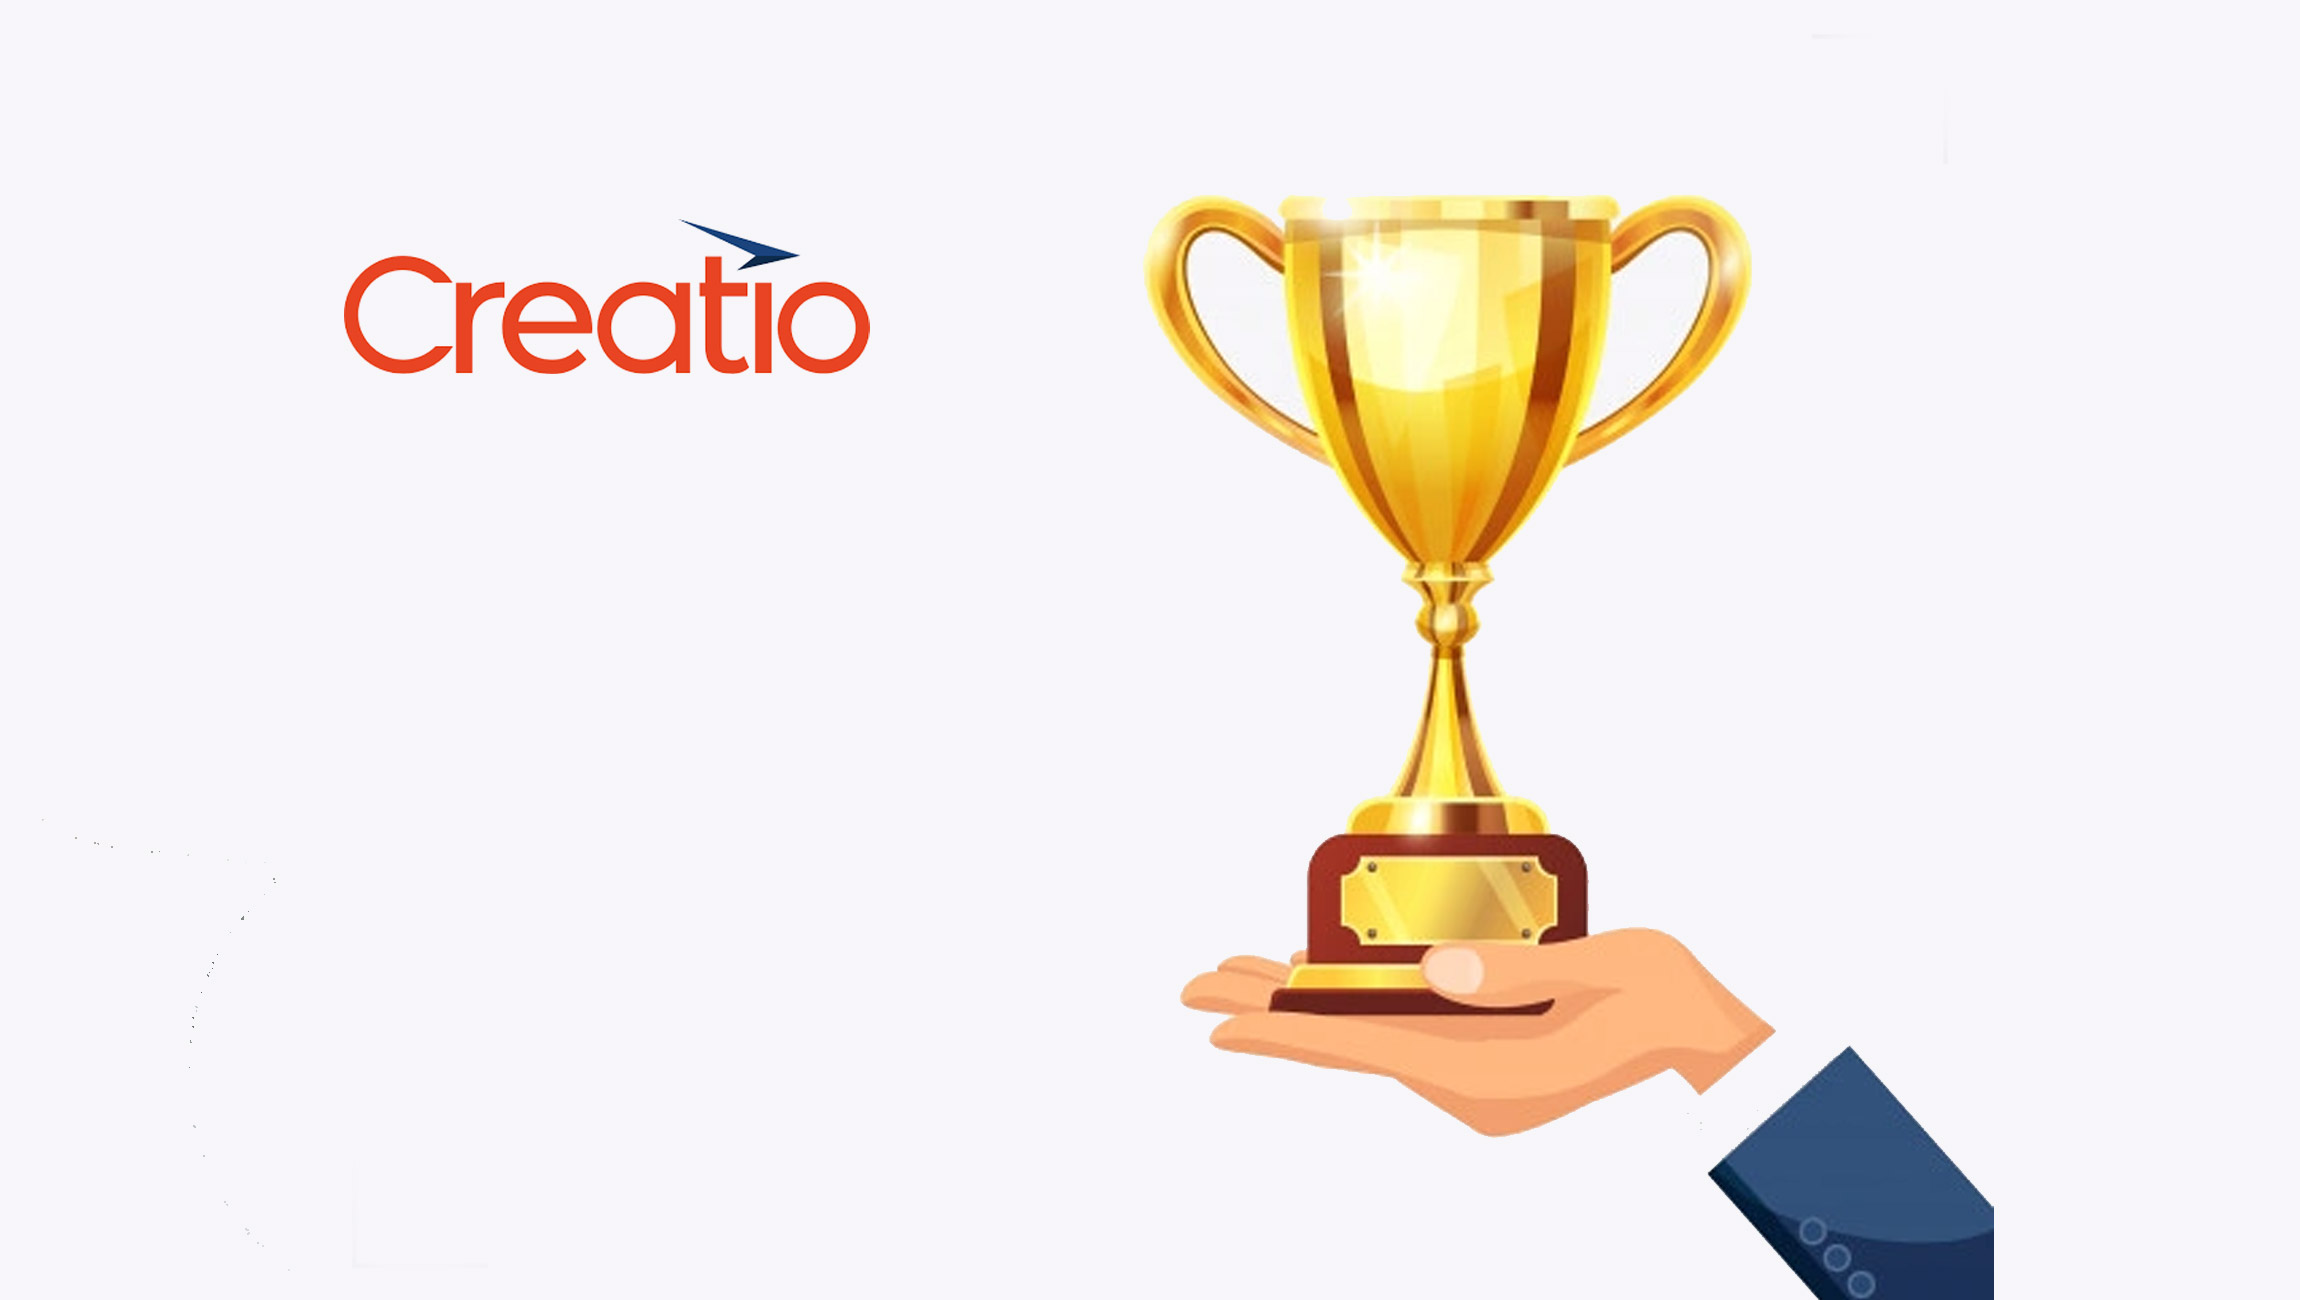 Creatio Wins G2 Leader Awards in 5 Categories, Including No-Code, Low-Code Development Platforms, Rapid Application Development, Business Process Management and CRM, Winter 2021